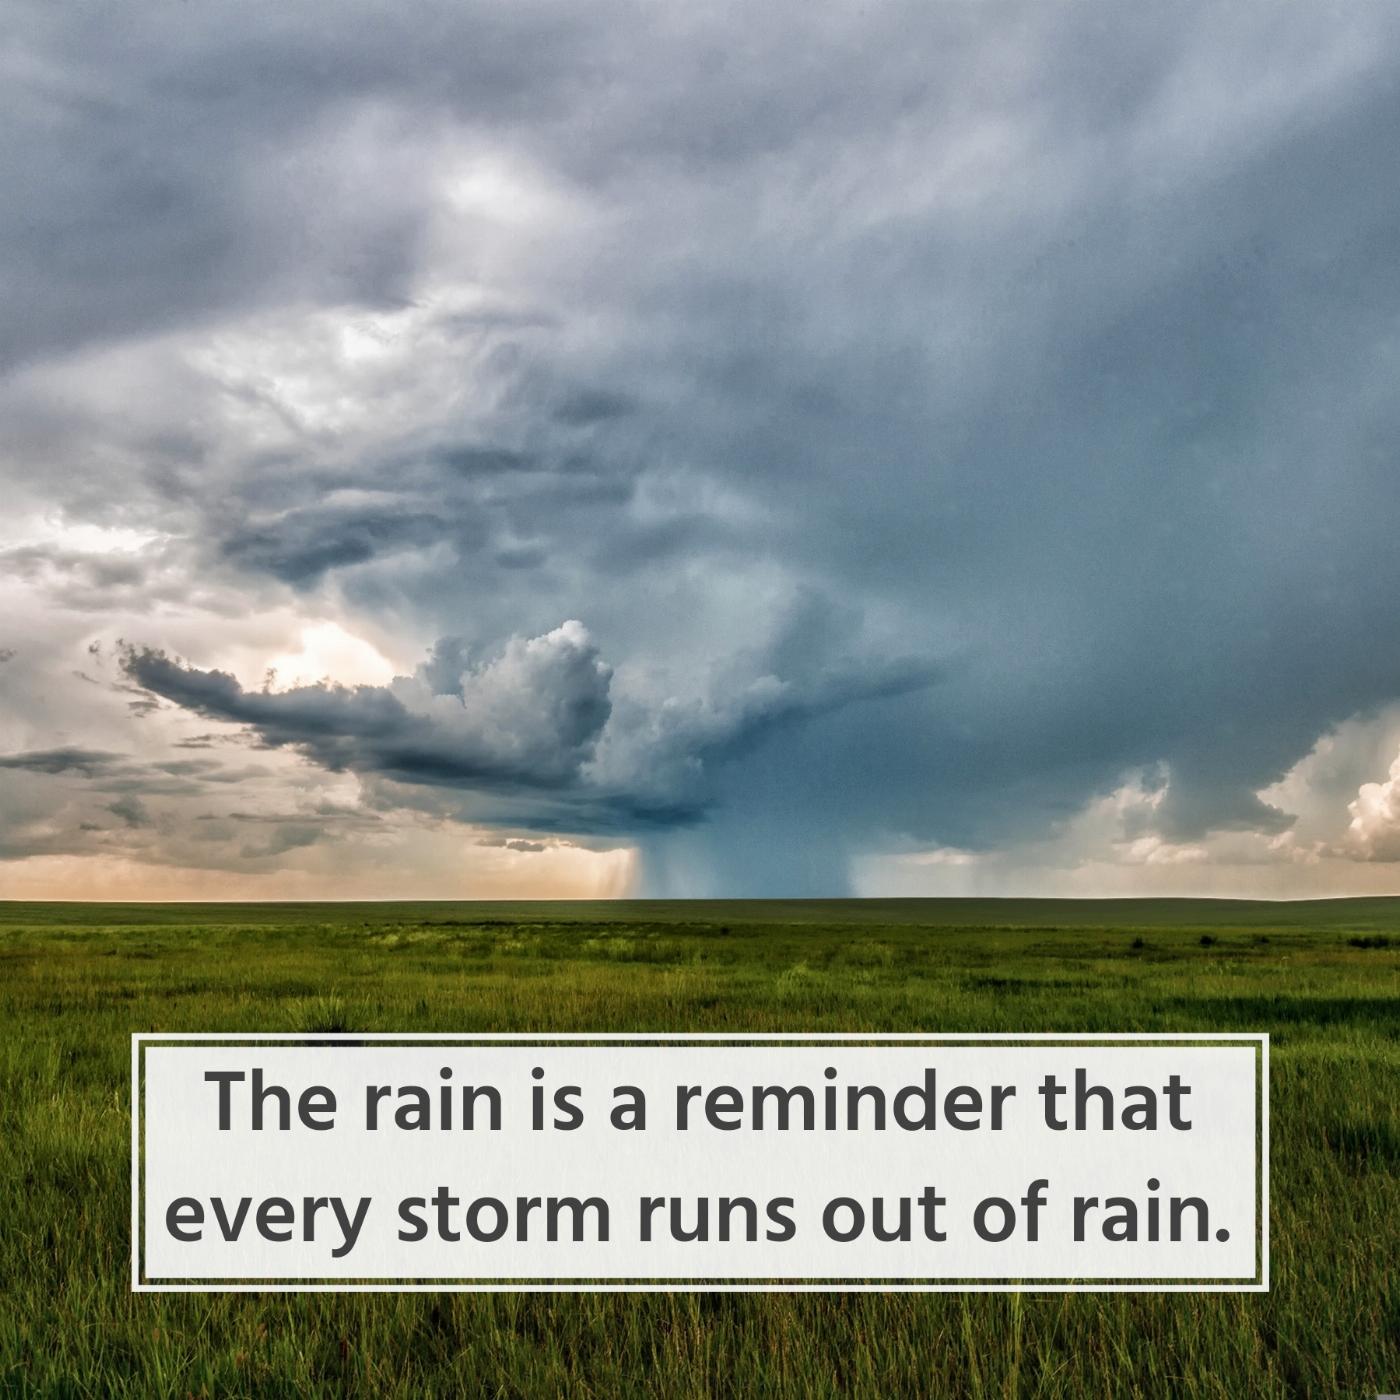 The rain is a reminder that every storm runs out of rain